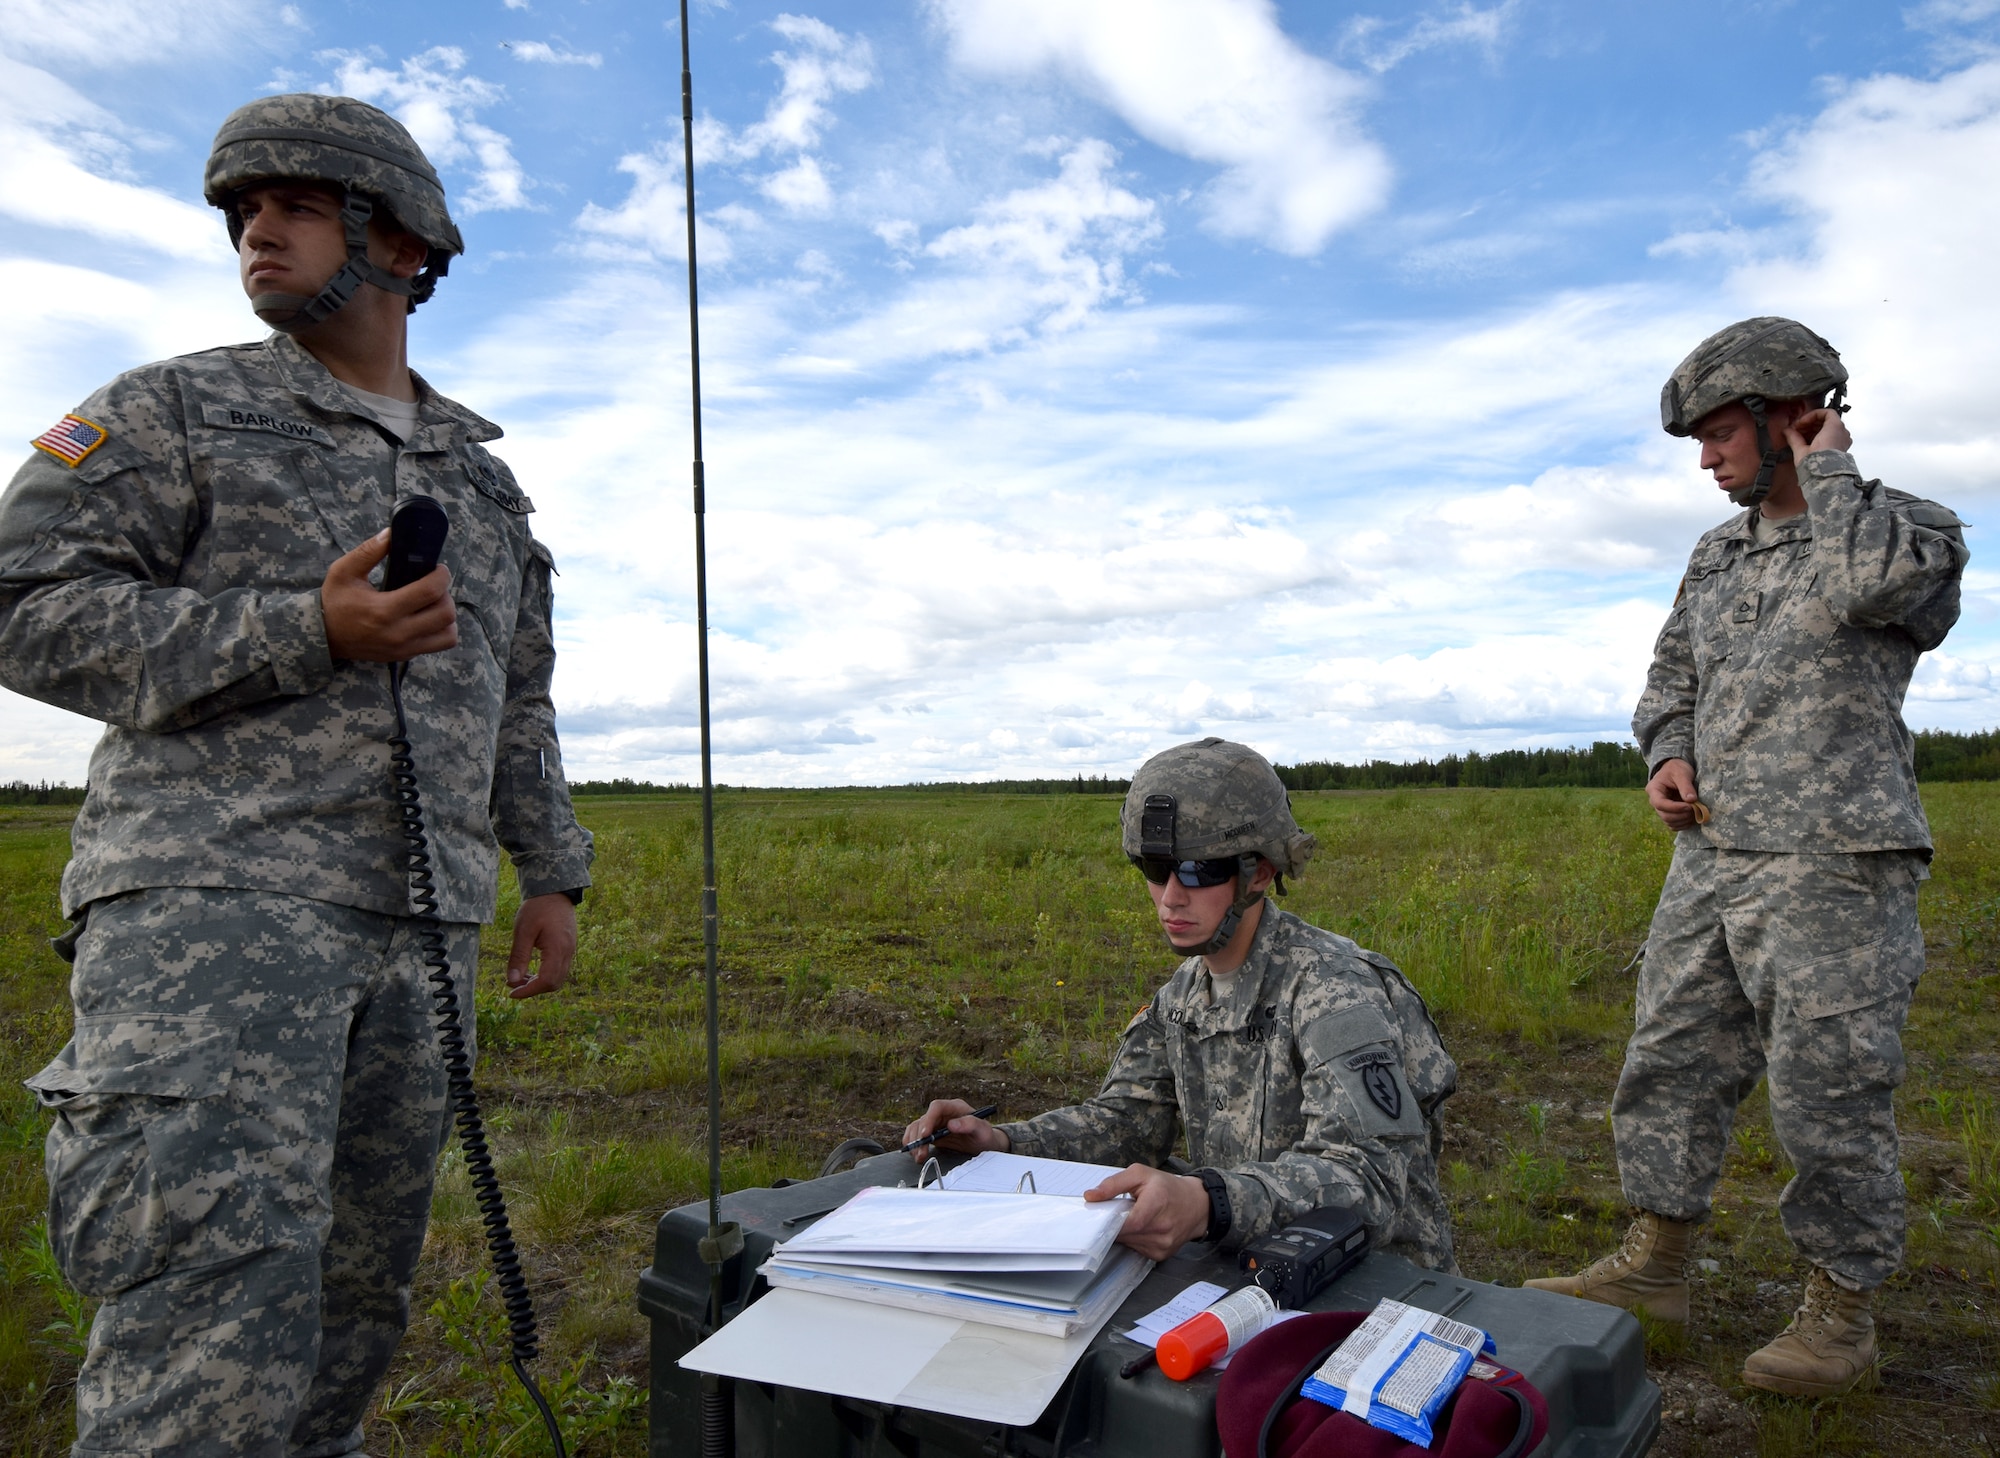 Soldiers with the 4th Infantry Brigade Combat Team (Air Borne), 25th Infantry Division coordinate with incoming paratroopers  on Joint Base Elmendorf-Richardson, Alaska, as part of a Joint Force Entry Exercise on June 7, 2014. The six-day exercise involved over 1,500 personnel including active duty Army, Air Force and Air National Guard. ( U.S. Air National Guard photo by Captain John Callahan/ Released)